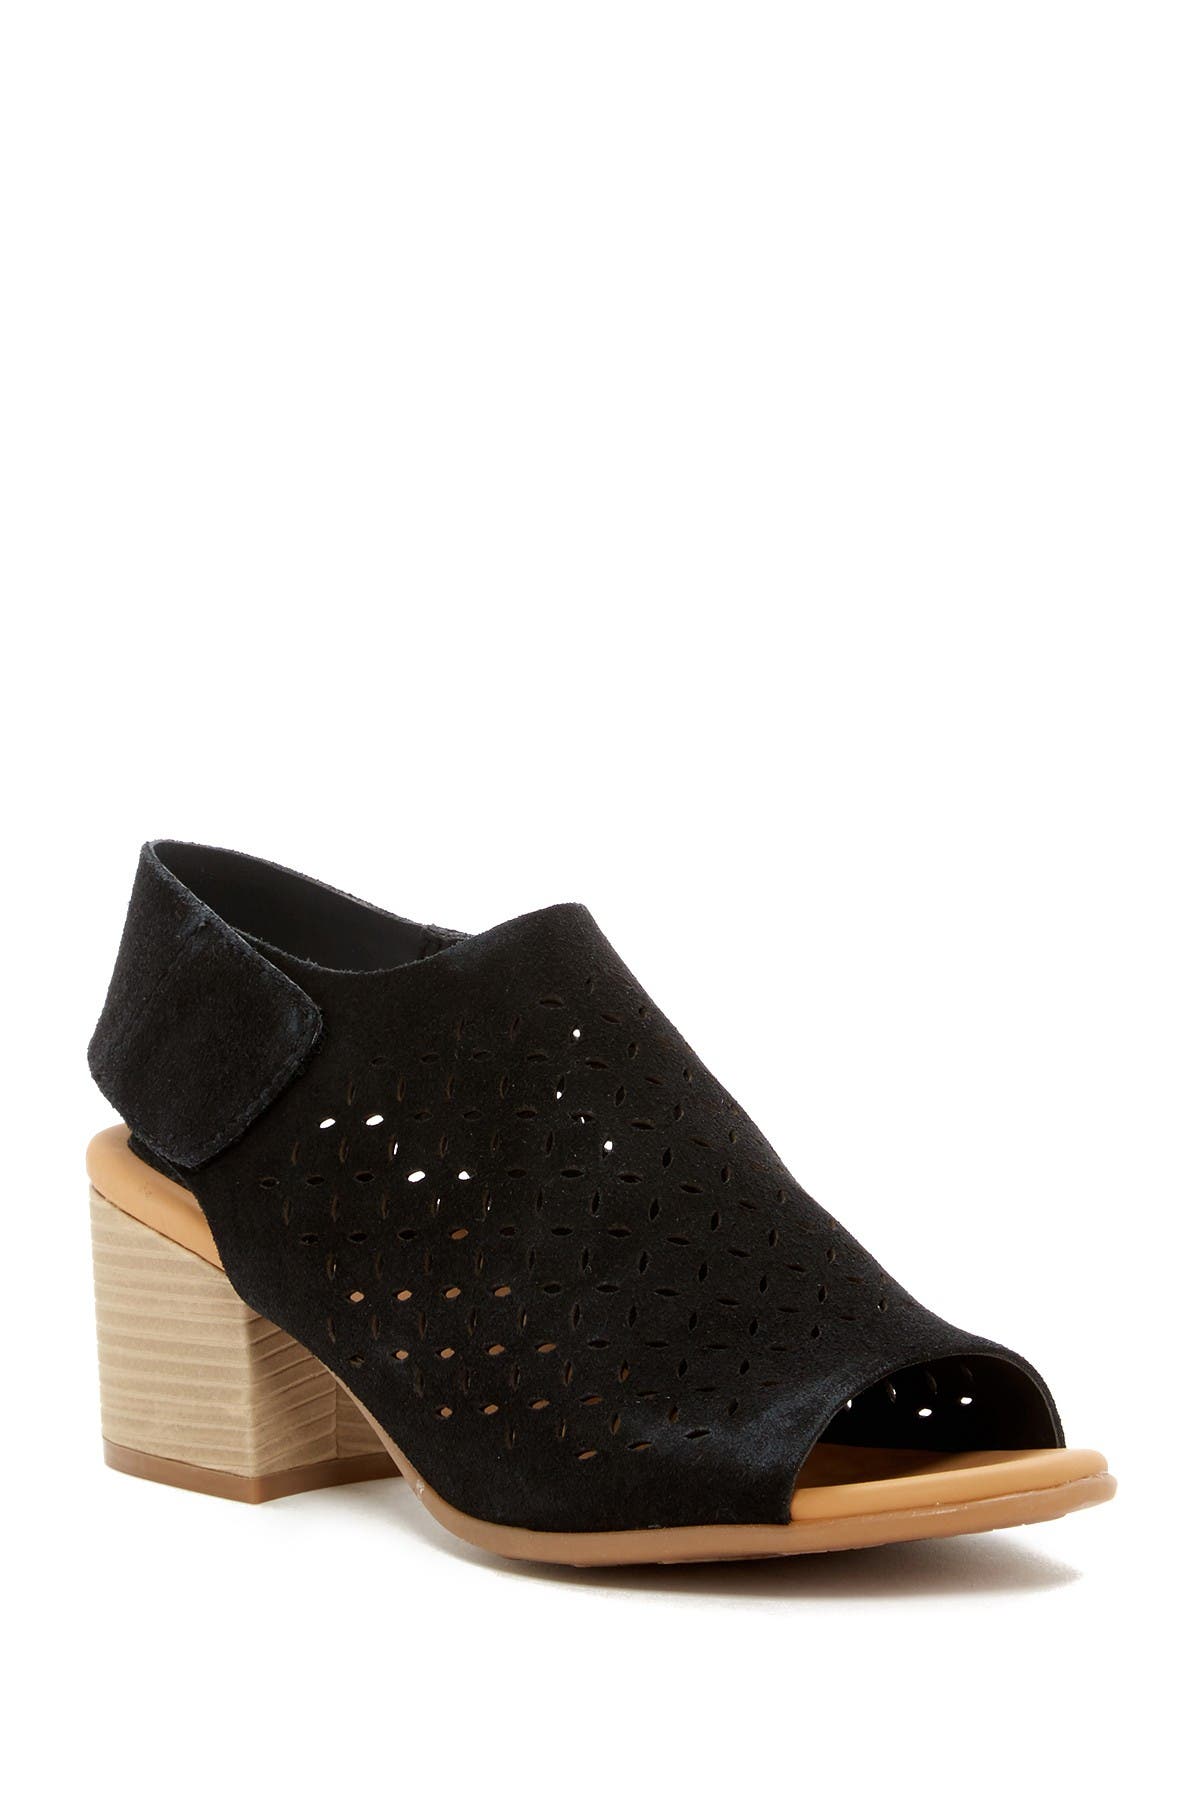 Kork-Ease | Cayleigh Perforated Block 